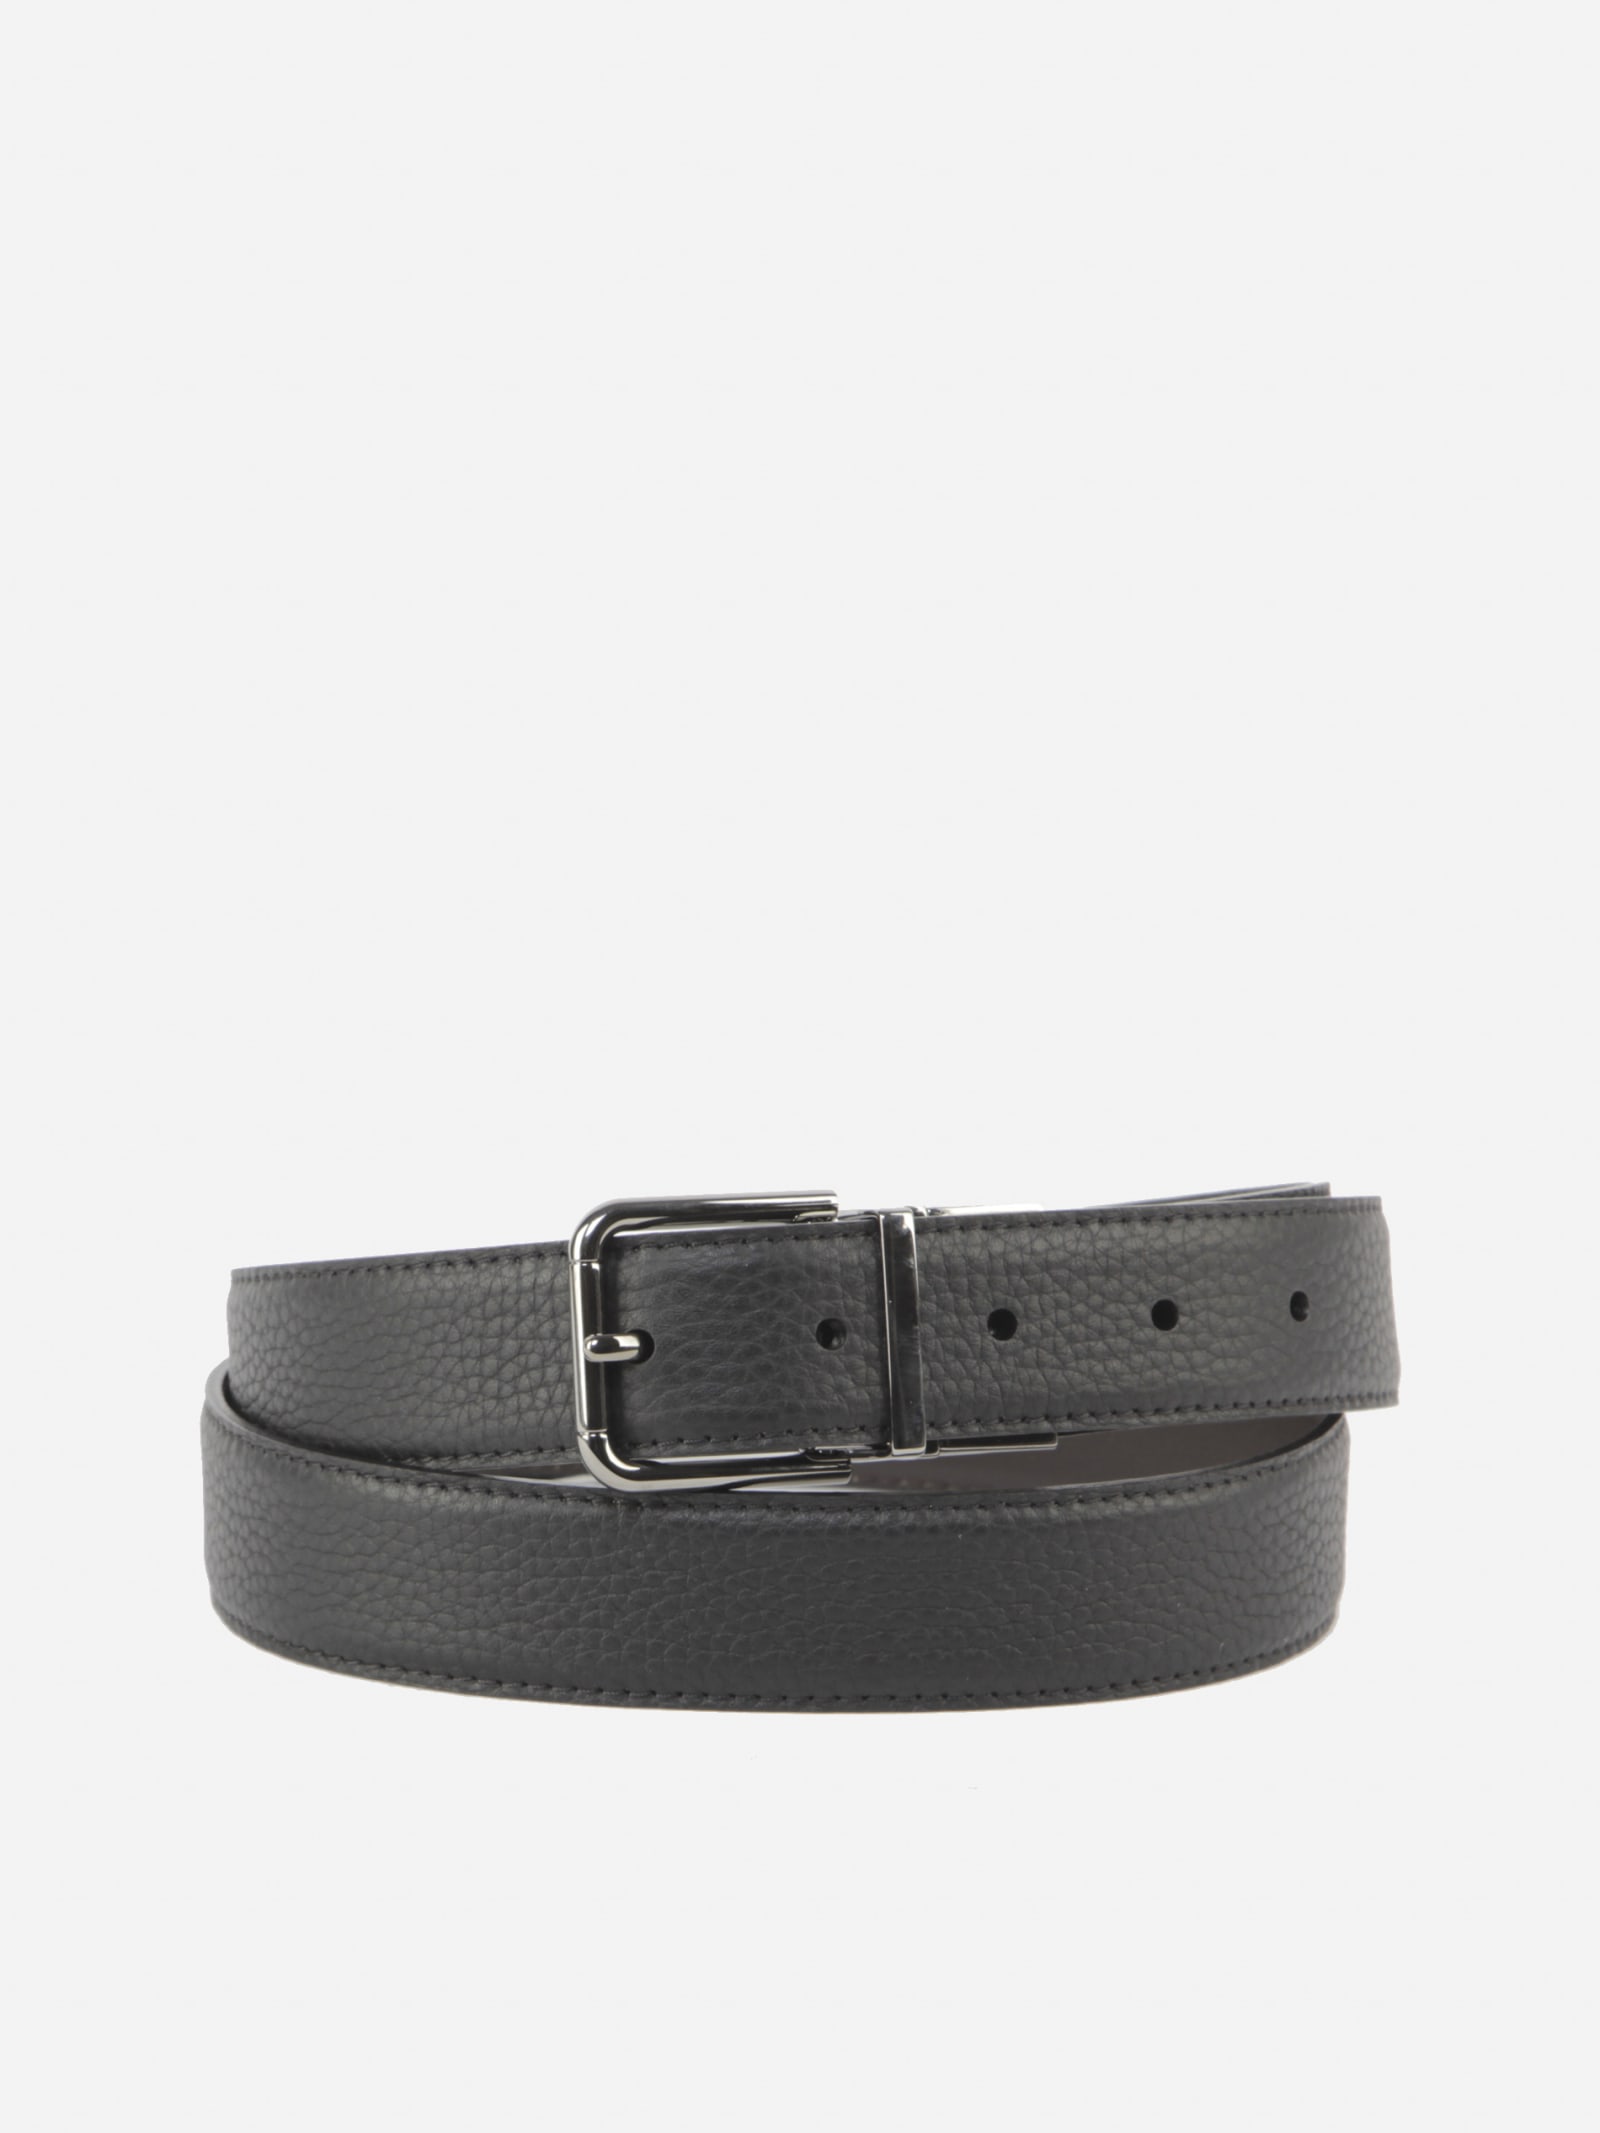 Dolce & Gabbana Textured Leather Belt With Metal Buckle